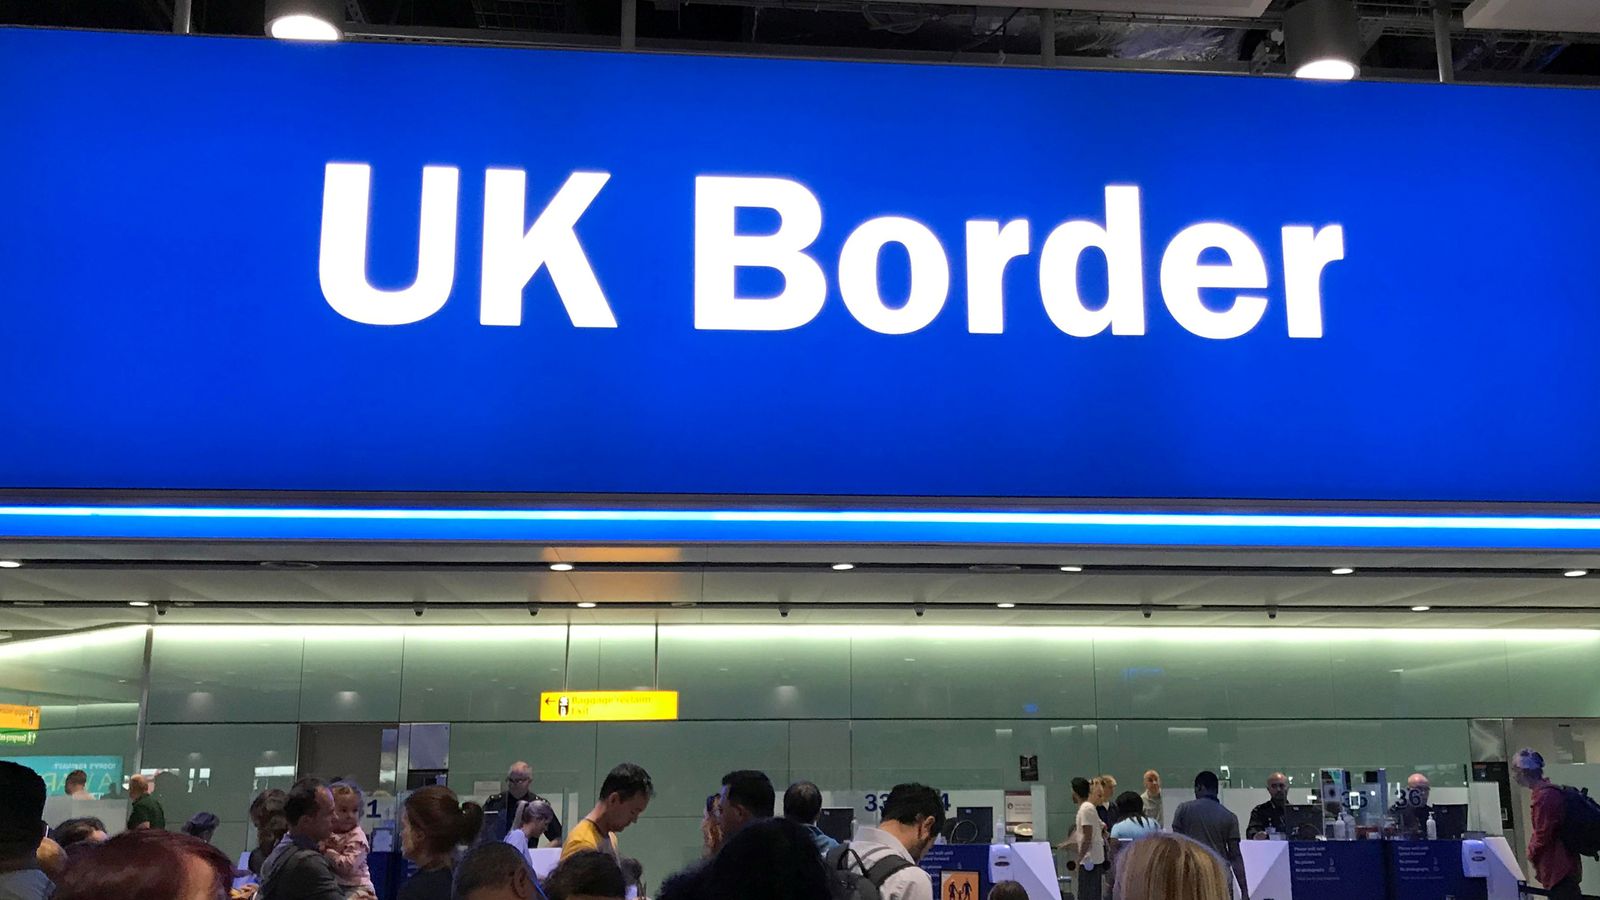 Net migration 2022 figure revised to record-breaking 745,000 as latest stats show 672,000 came to UK in last year